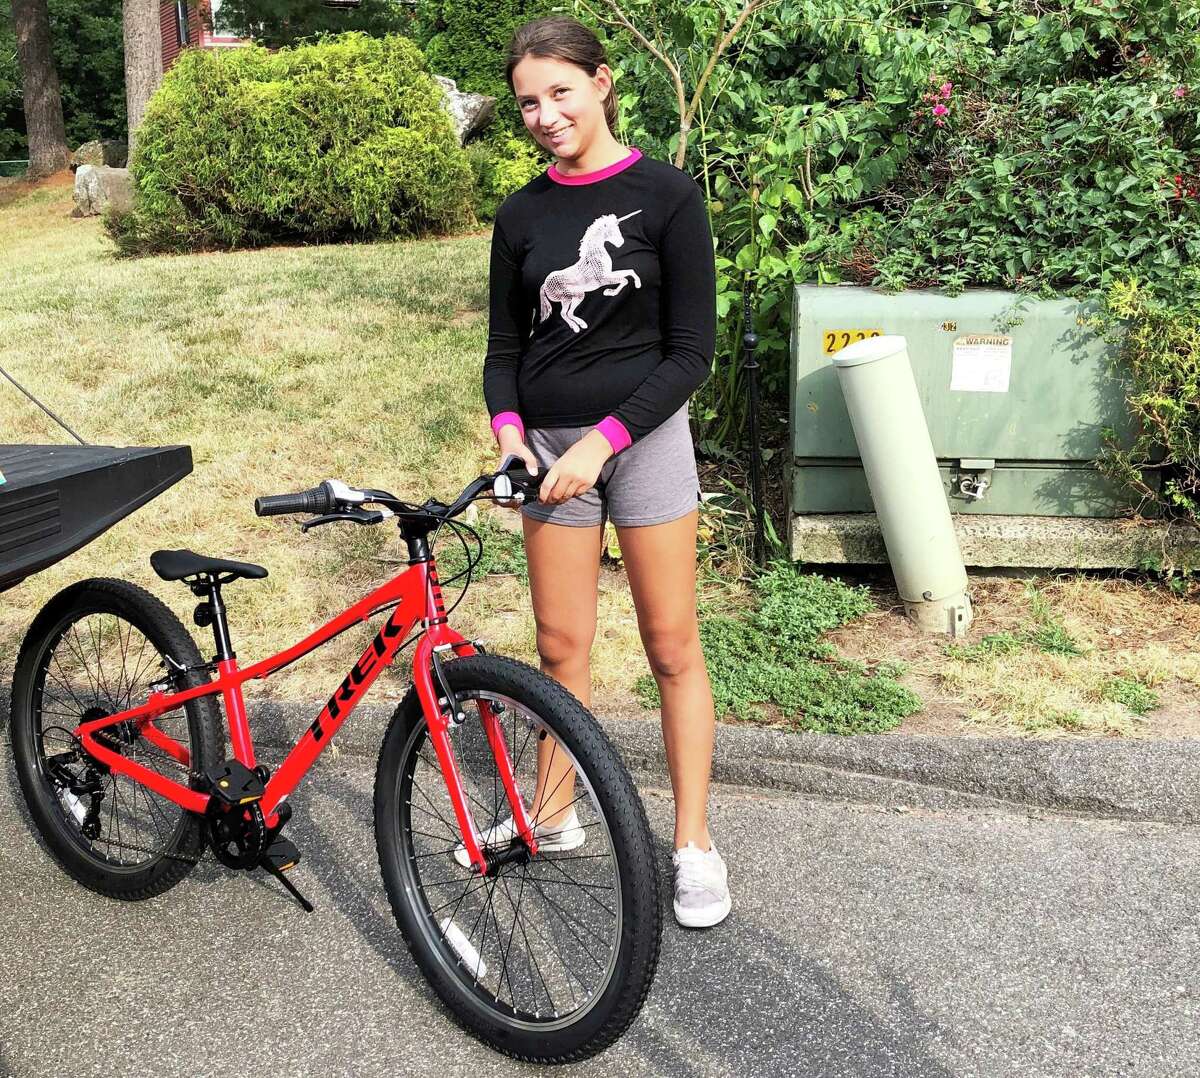 Beman Middle School student Kassidy of Middletown recently received a free BMX bike from Big Brothers Big Sisters of Connecticut.